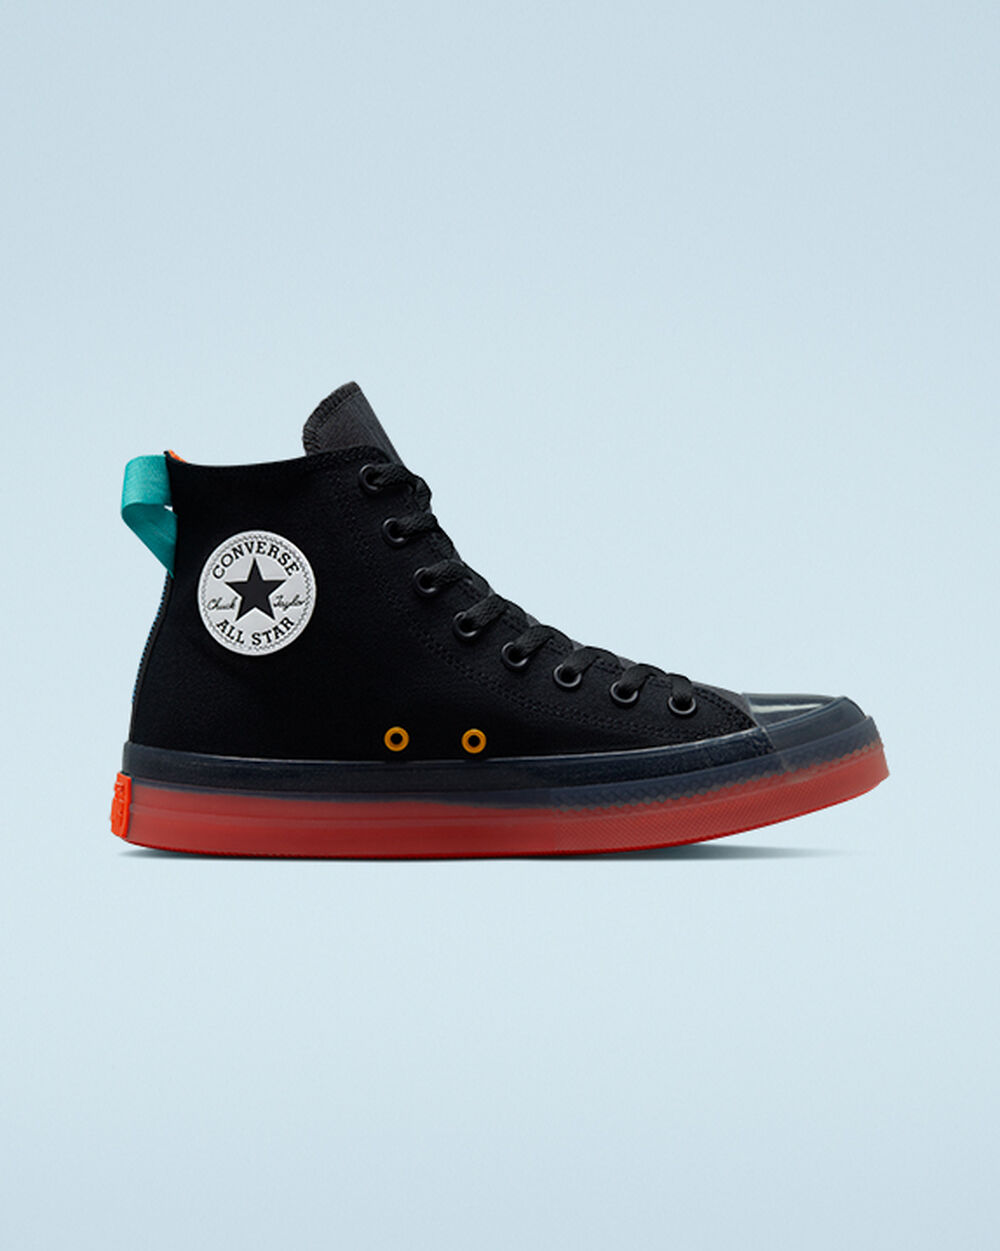 Tenis Converse Chuck Taylor All Star CX Mujer Negros Grises | Mexico-341276